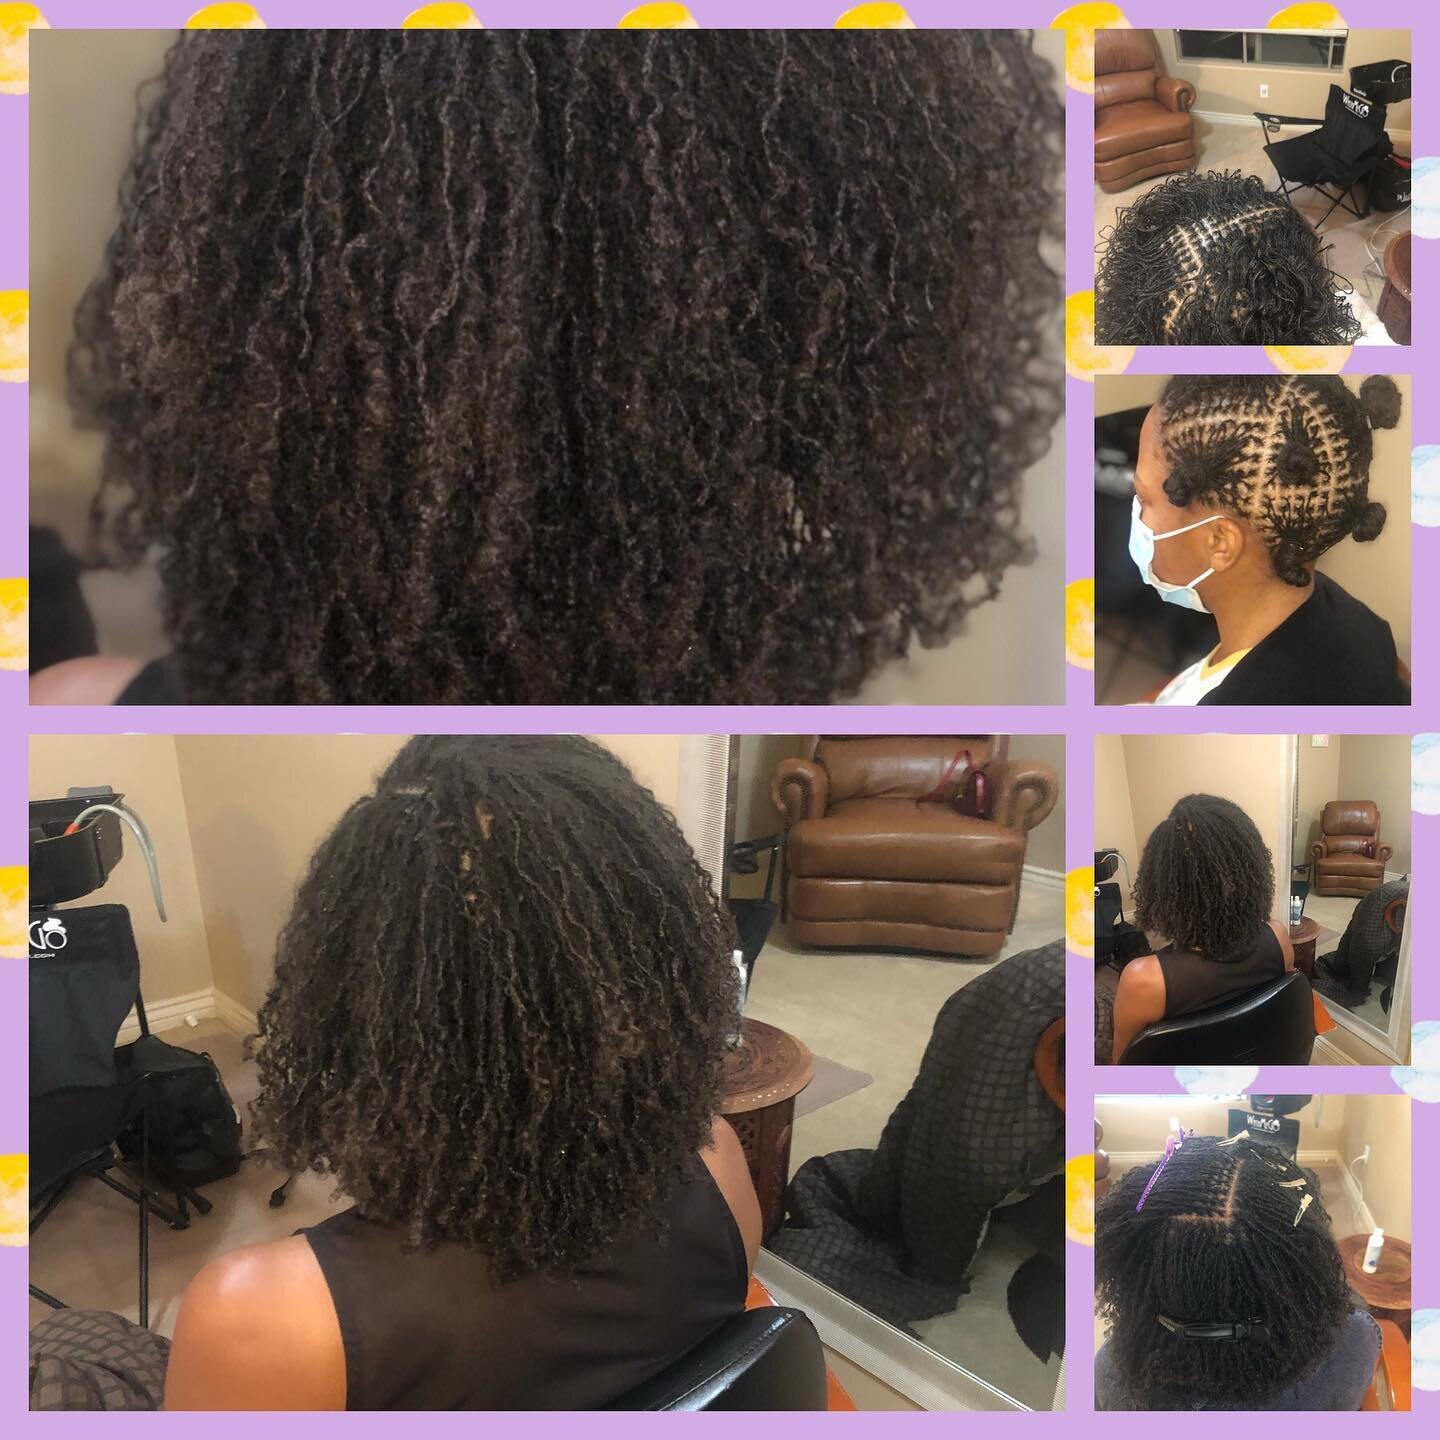 Install day and about 8 months later #sisterlocsjourney #sisterlocksphoenix #sisterlocksphx #locsphoenix #naturalhair #sisterlocksarizona #naturalhairinarizona